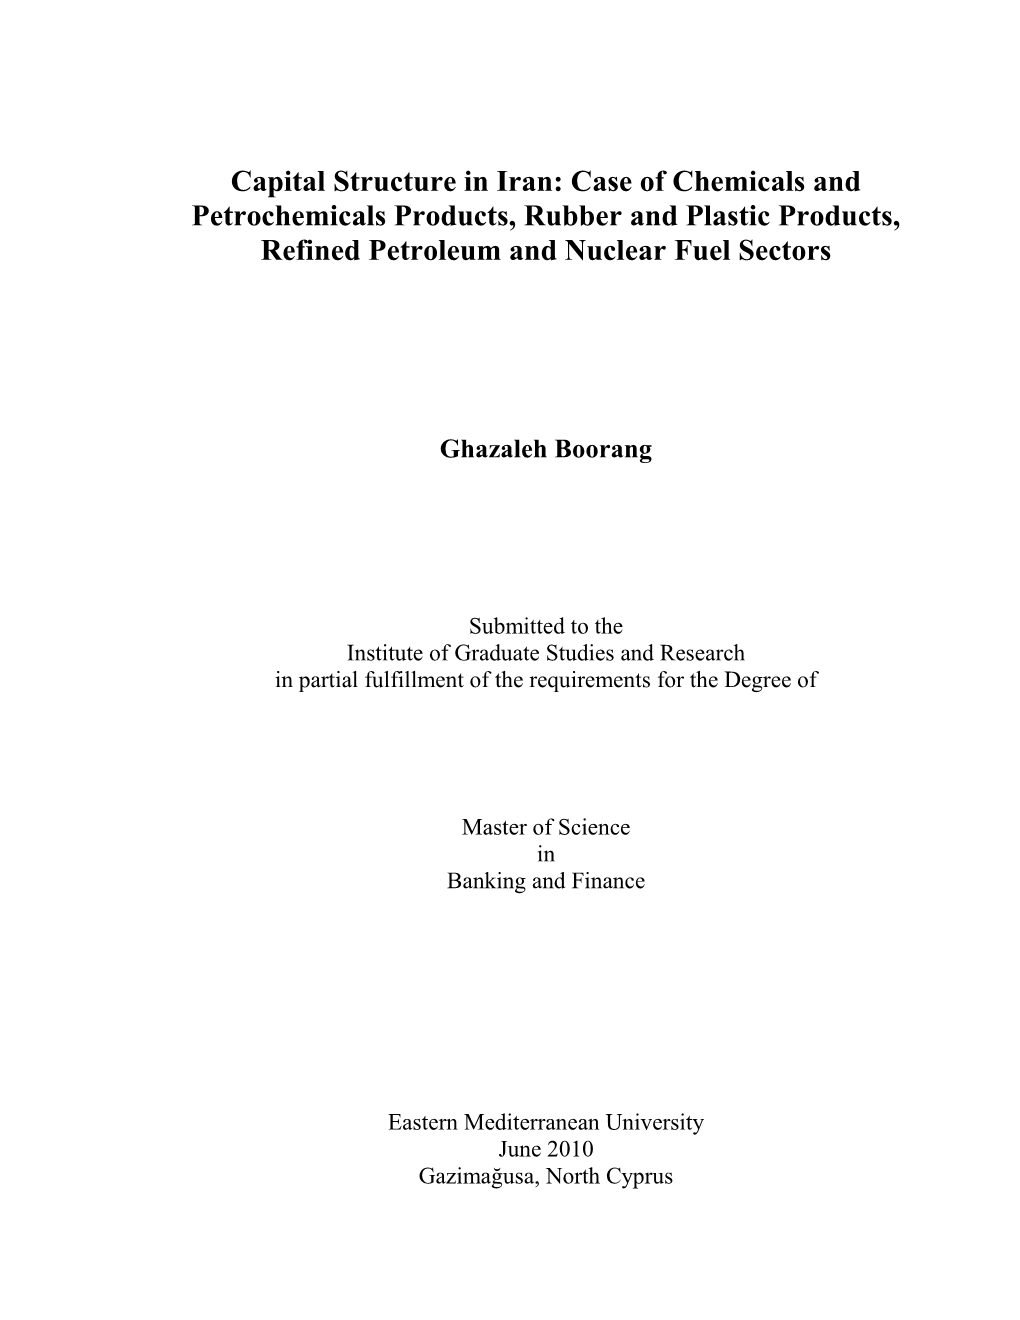 Capital Structure in Iran: Case of Chemicals and Petrochemicals Products, Rubber and Plastic Products, Refined Petroleum and Nuclear Fuel Sectors